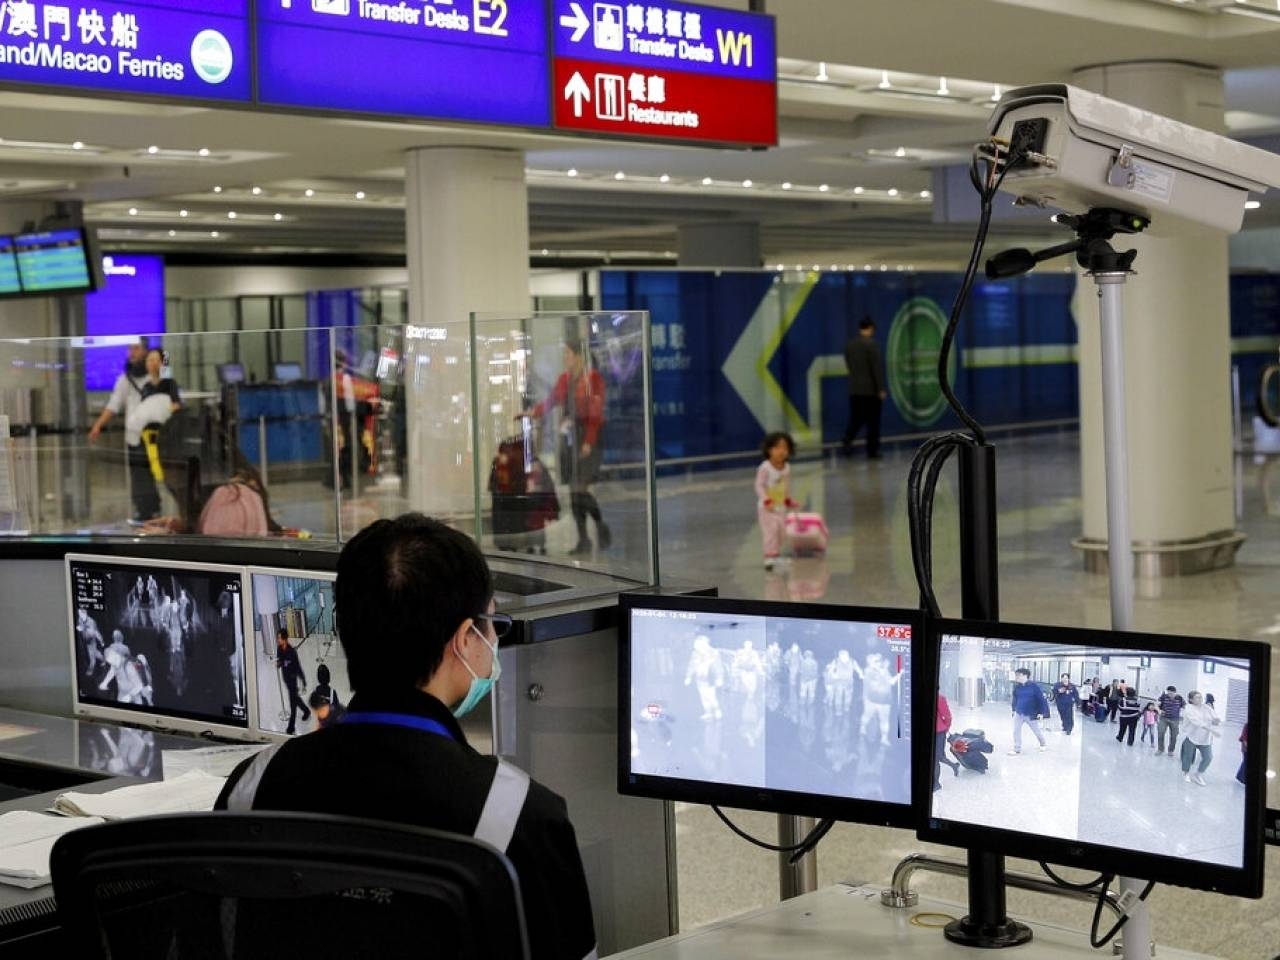 Airport authorities have stepped up screening of passengers. -Courtesy photo